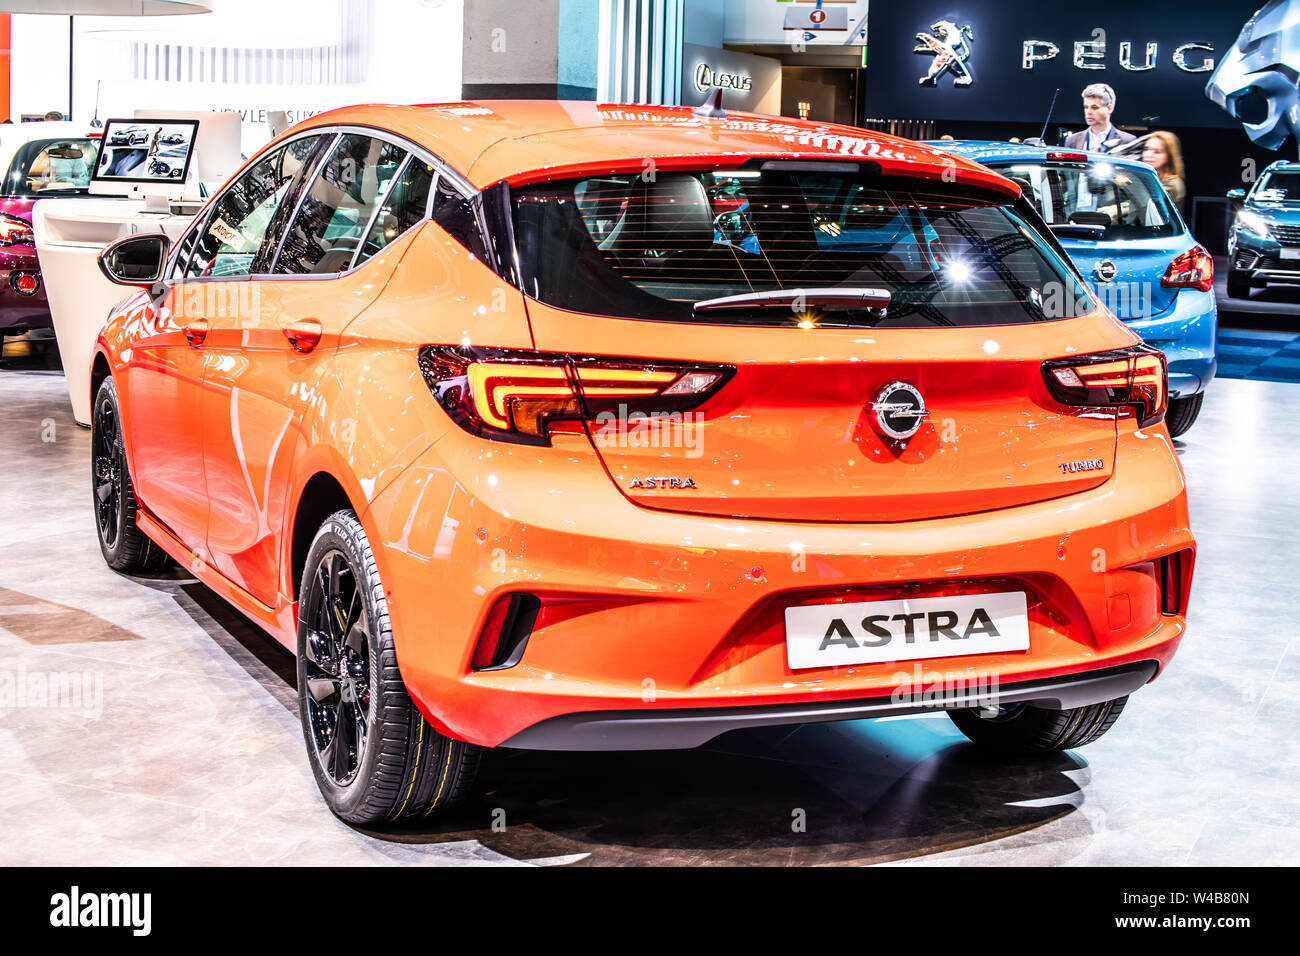 Brussels, Jan 2019 OPEL ASTRA HATCHBACK, Brussels Motor Show, 5th gen Astra K, D2XX platform, compact car produced by Opel (PSA Group) Stock Photo